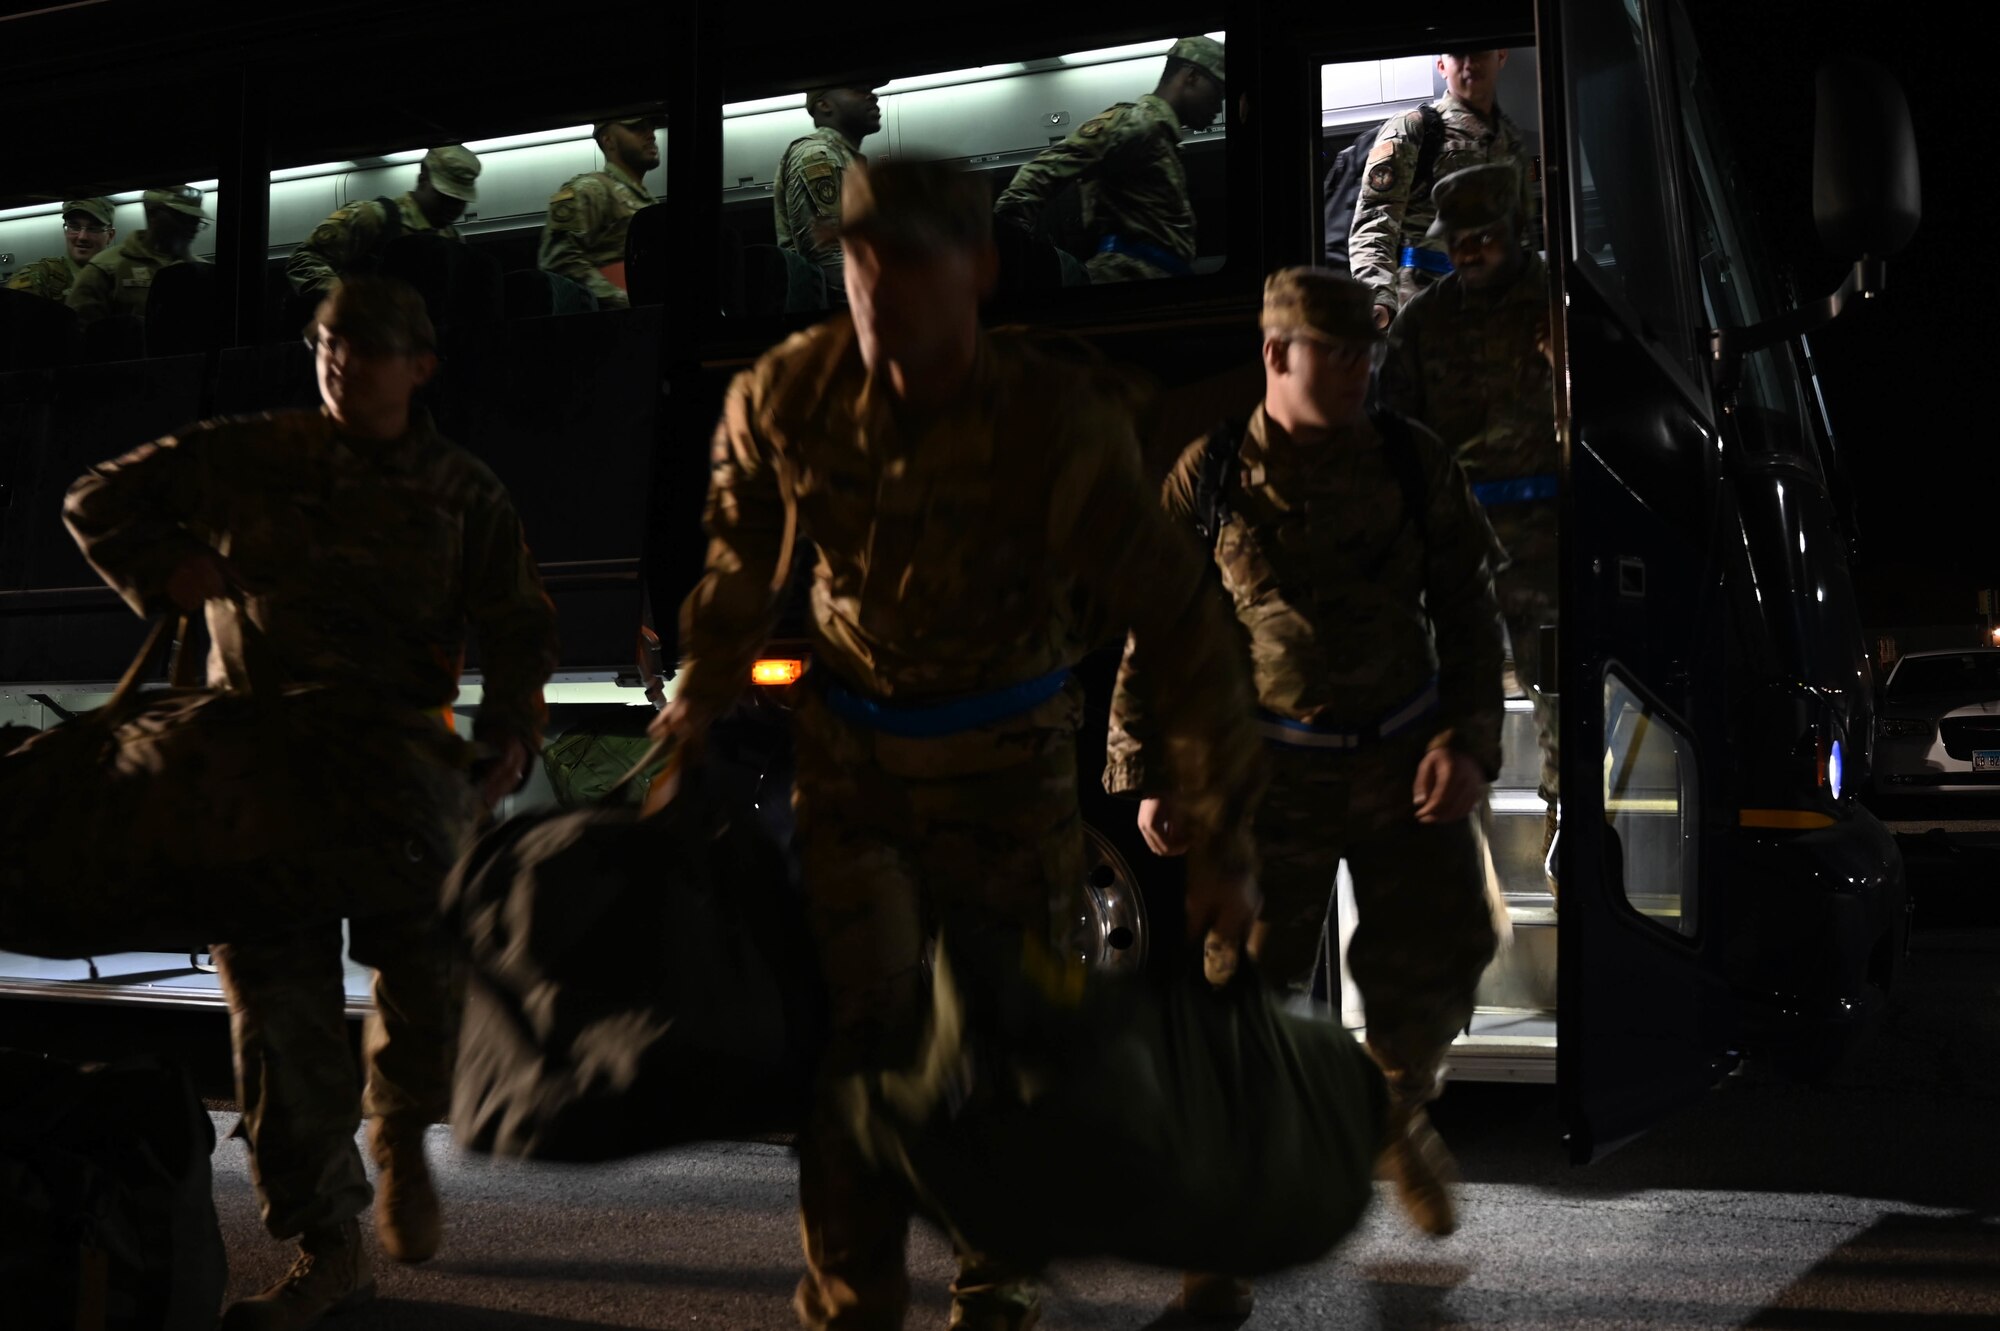 375th Civil Engineering Squadron Airmen rush to unload  from a bus during a rapid deployment rehearsal on Scott Air Force Base, Illinois, March 16, 2022. This deployment mobility rehearsal emphasizes readiness of command and control procedures and continuity of operations in a simulated contested environment. (U.S. Air Force photo by Airman 1st Class Mark Sulaica)